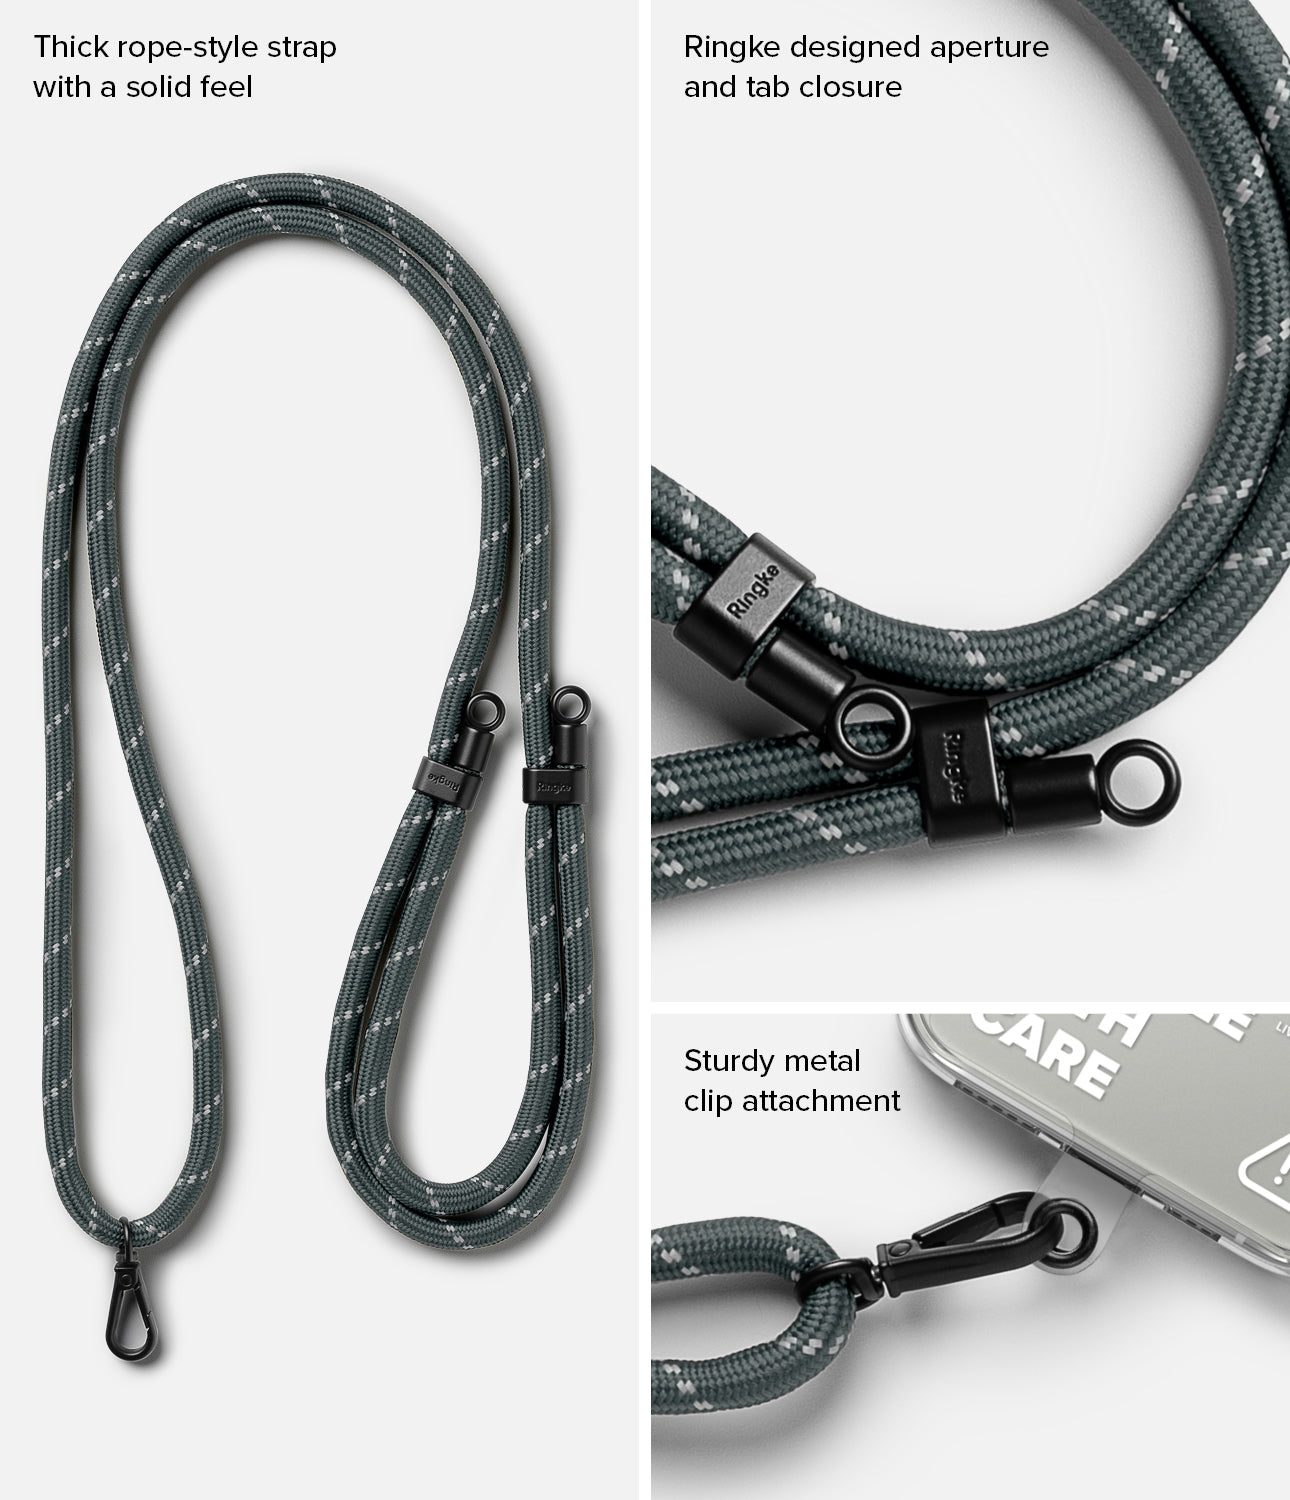 Thick rope-style strap with a solid feel, Rinke designed aperture and tab closure, Sturdy metal clip attachment.